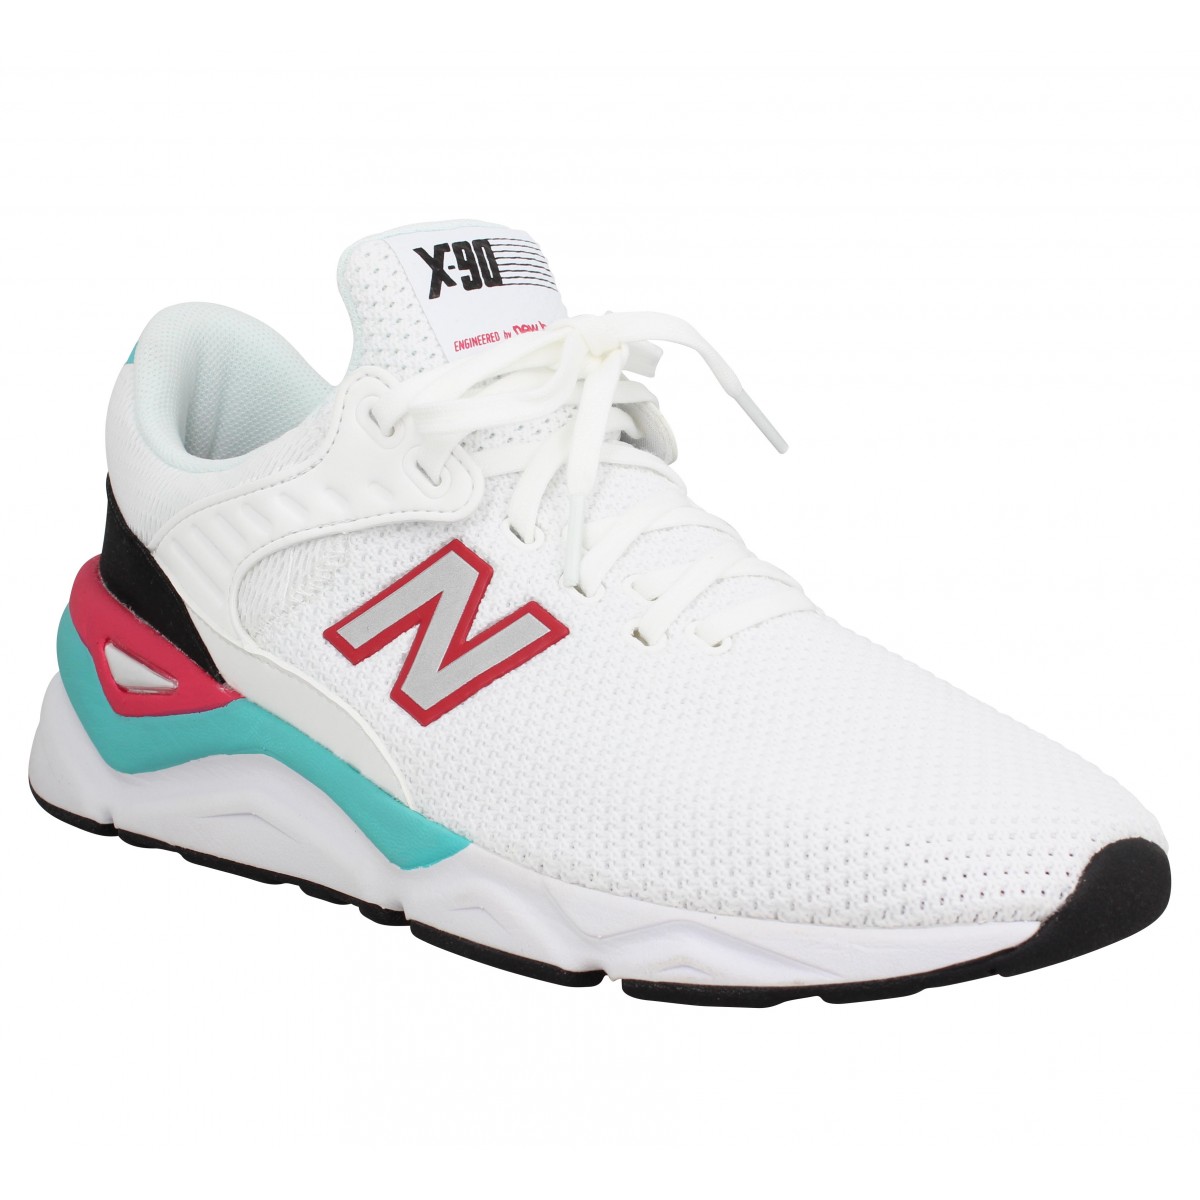 new balance homme chaussures